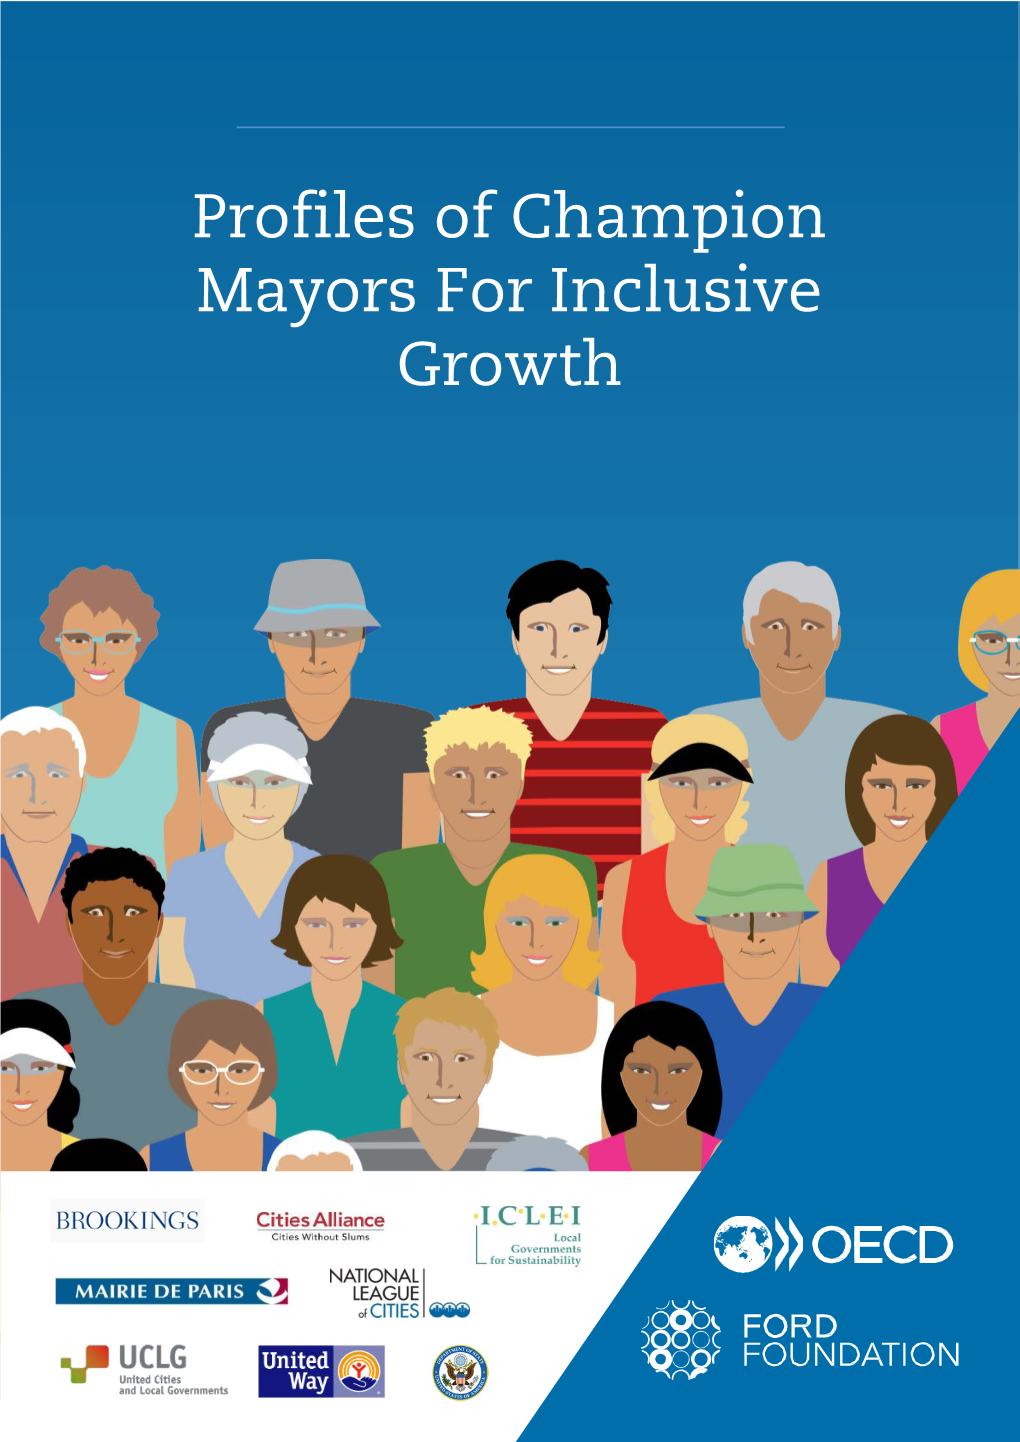 Profiles of Champion Mayors for Inclusive Growth